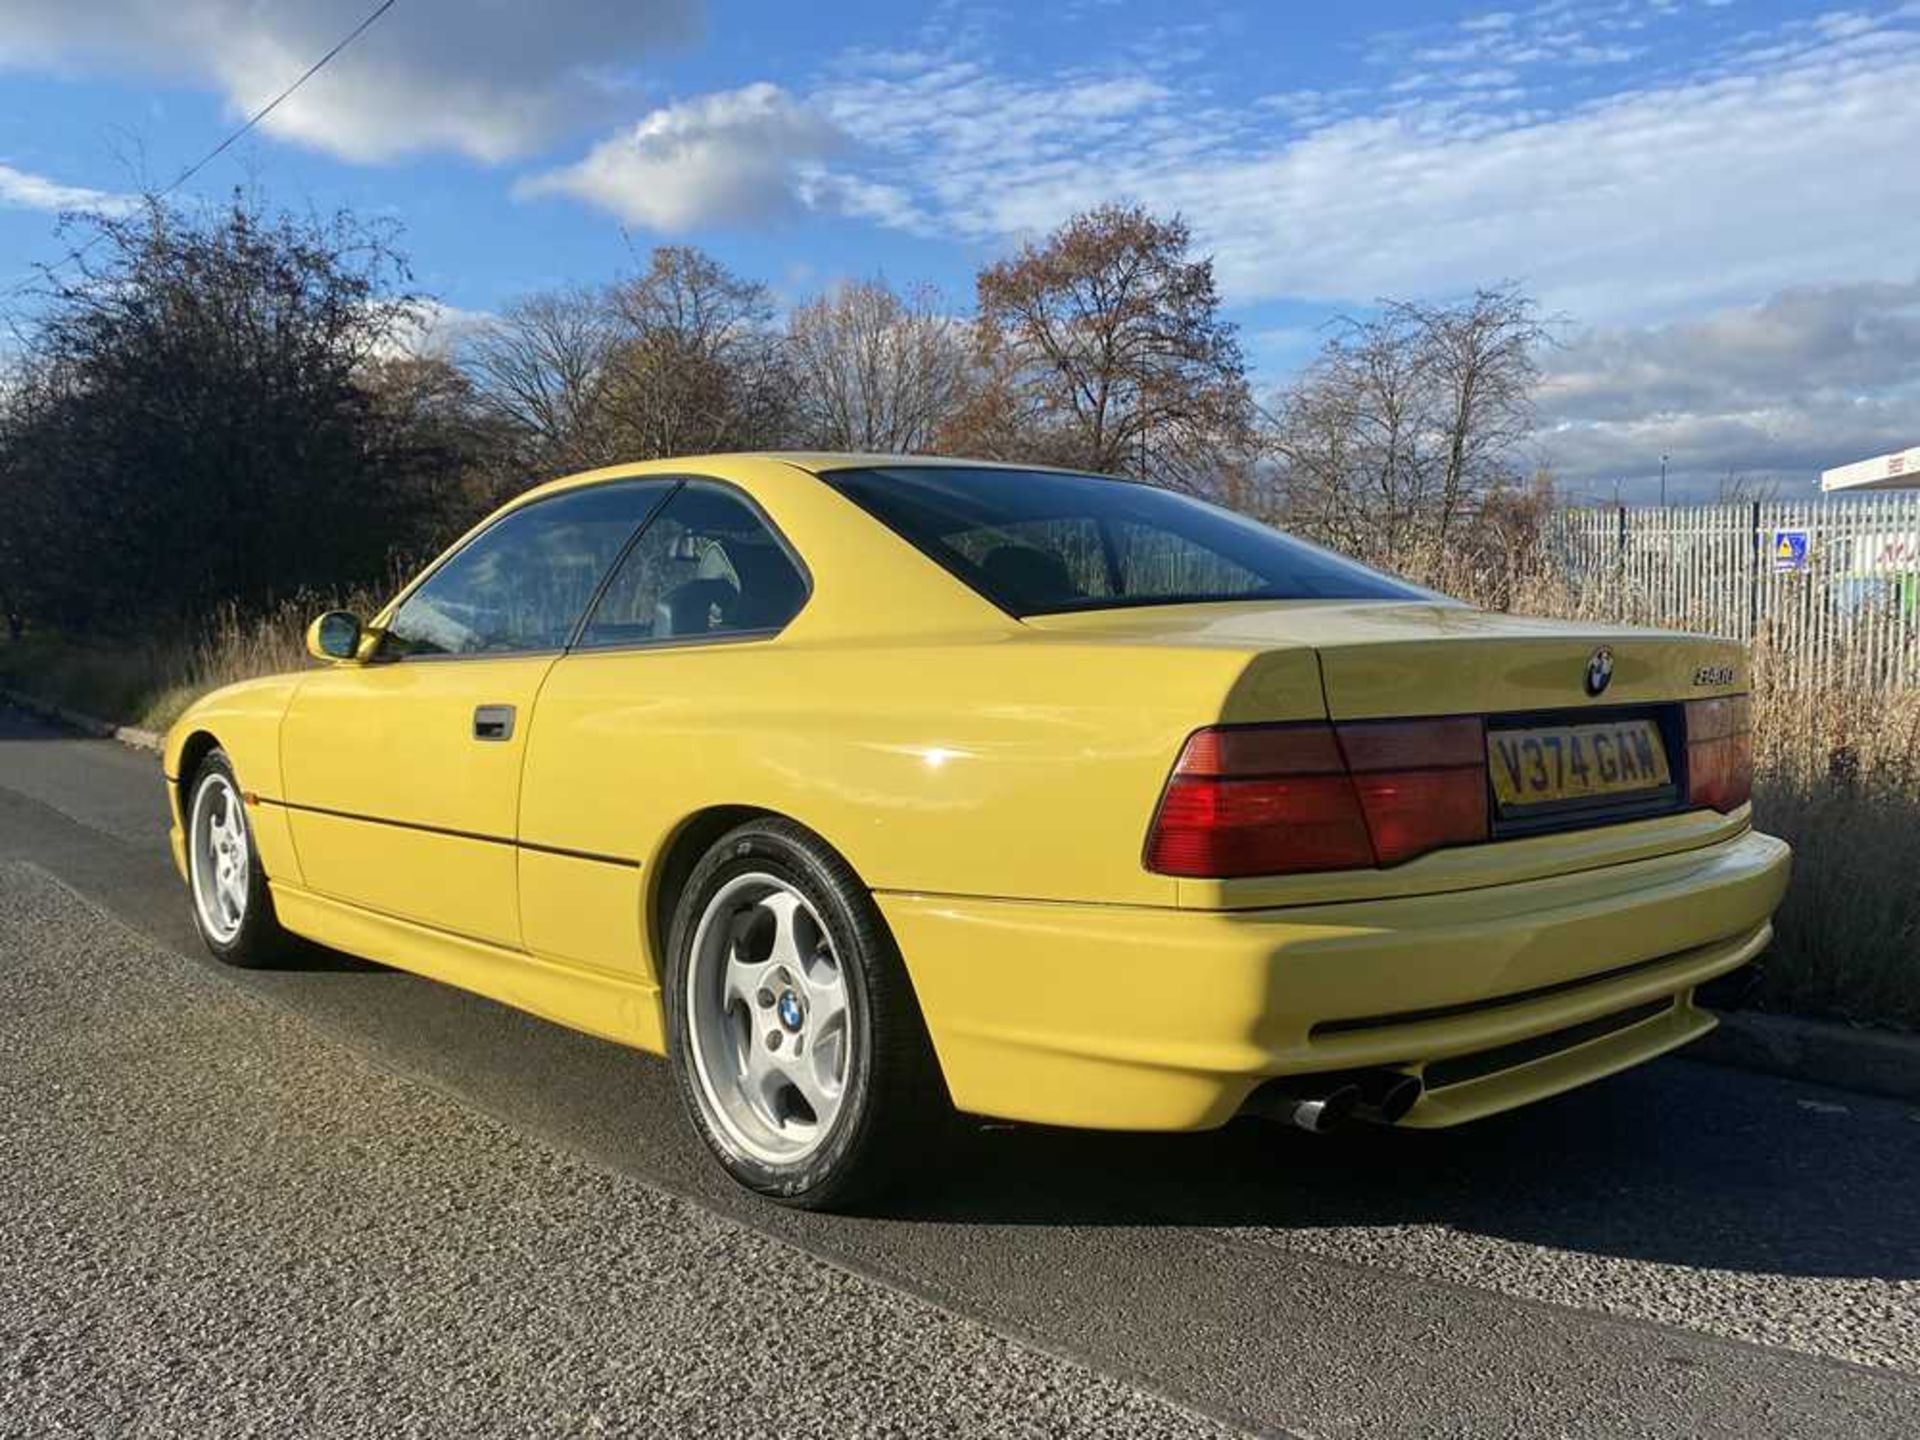 1997 BMW 840 CI Sport Understood to be 1 of just 38 finished in Dakar Yellow II - Image 15 of 79